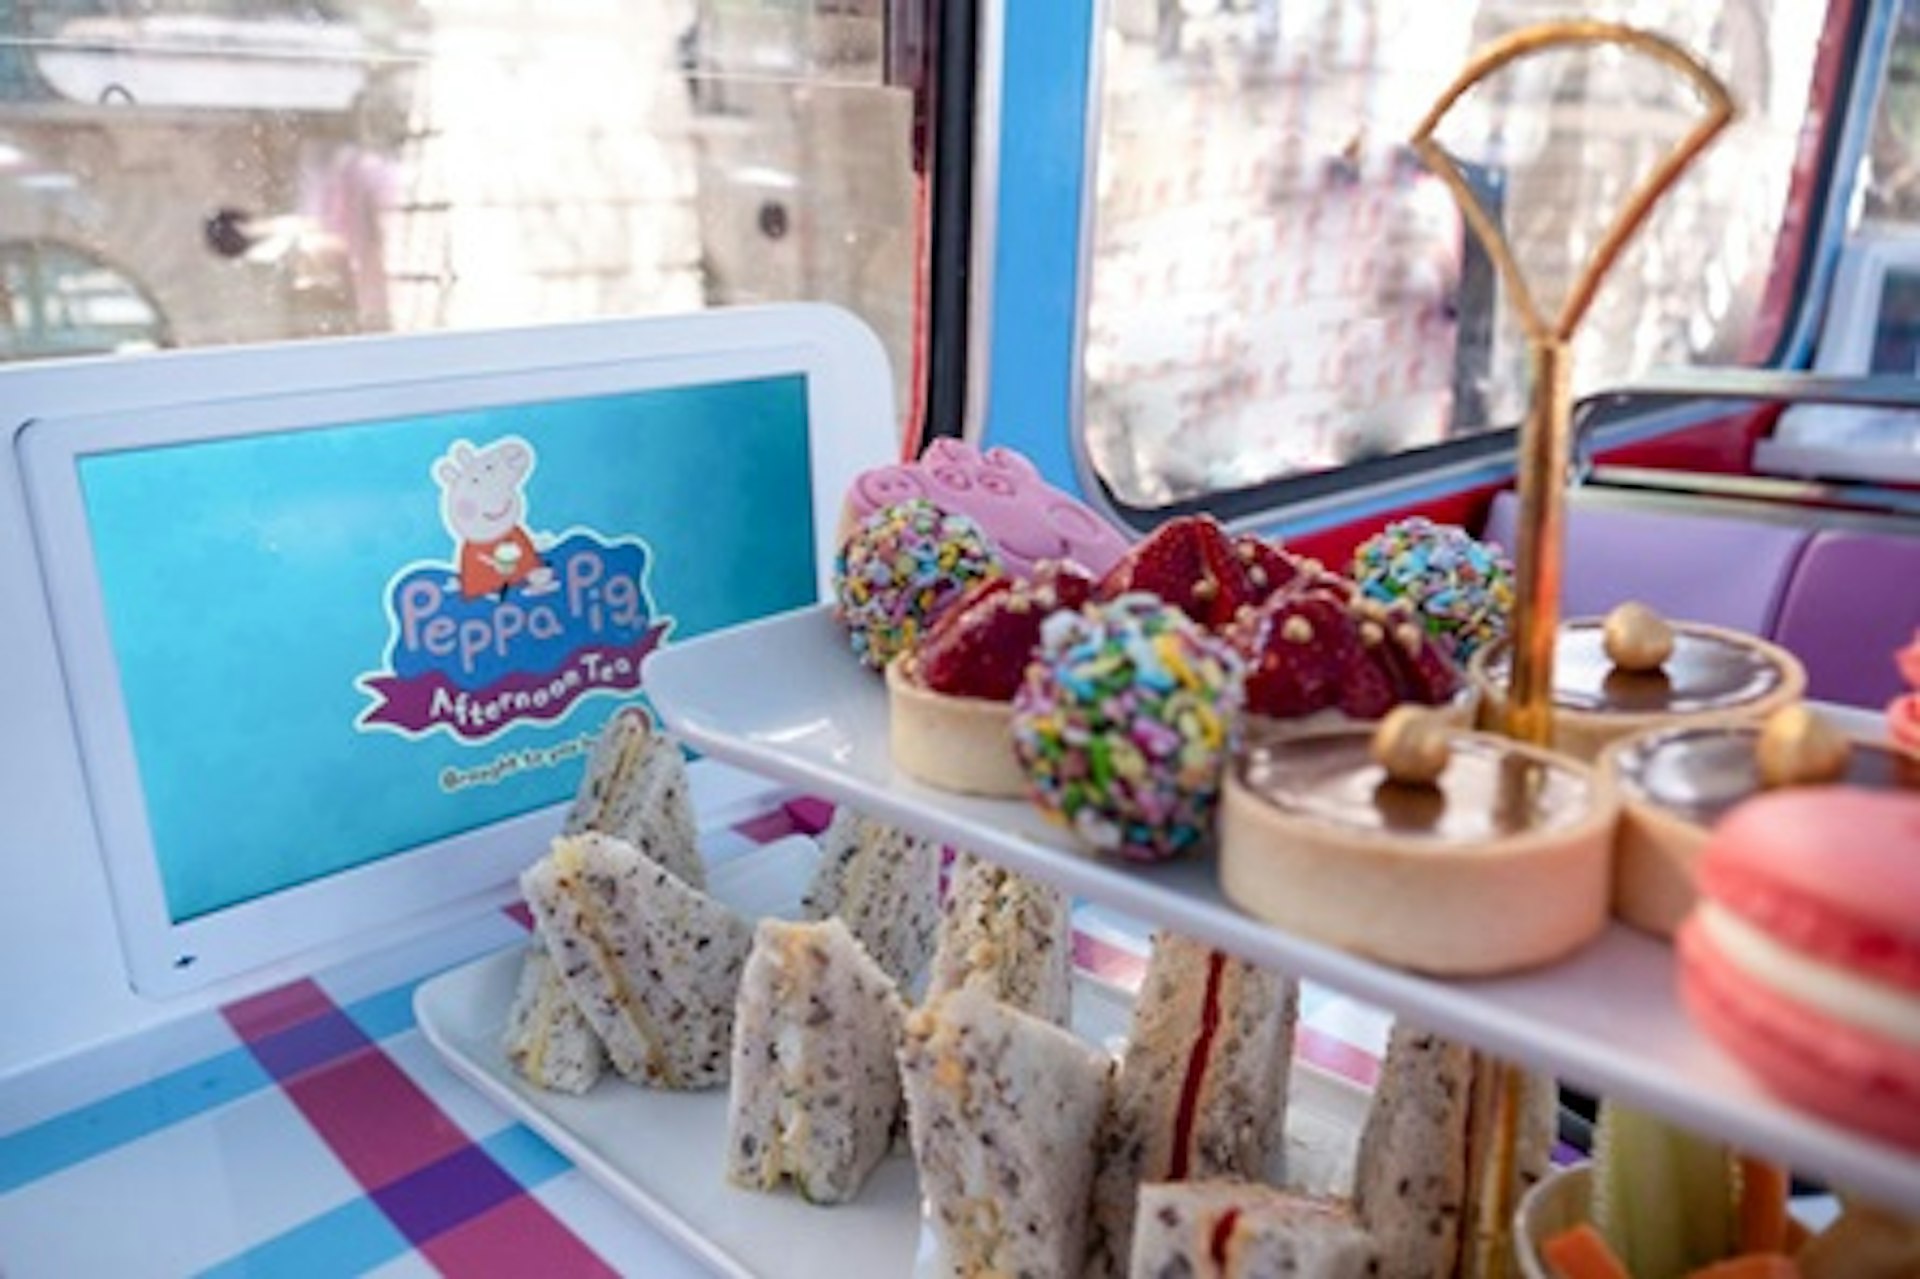 Peppa Pig Afternoon Tea Bus Tour for One Adult and One Child 3